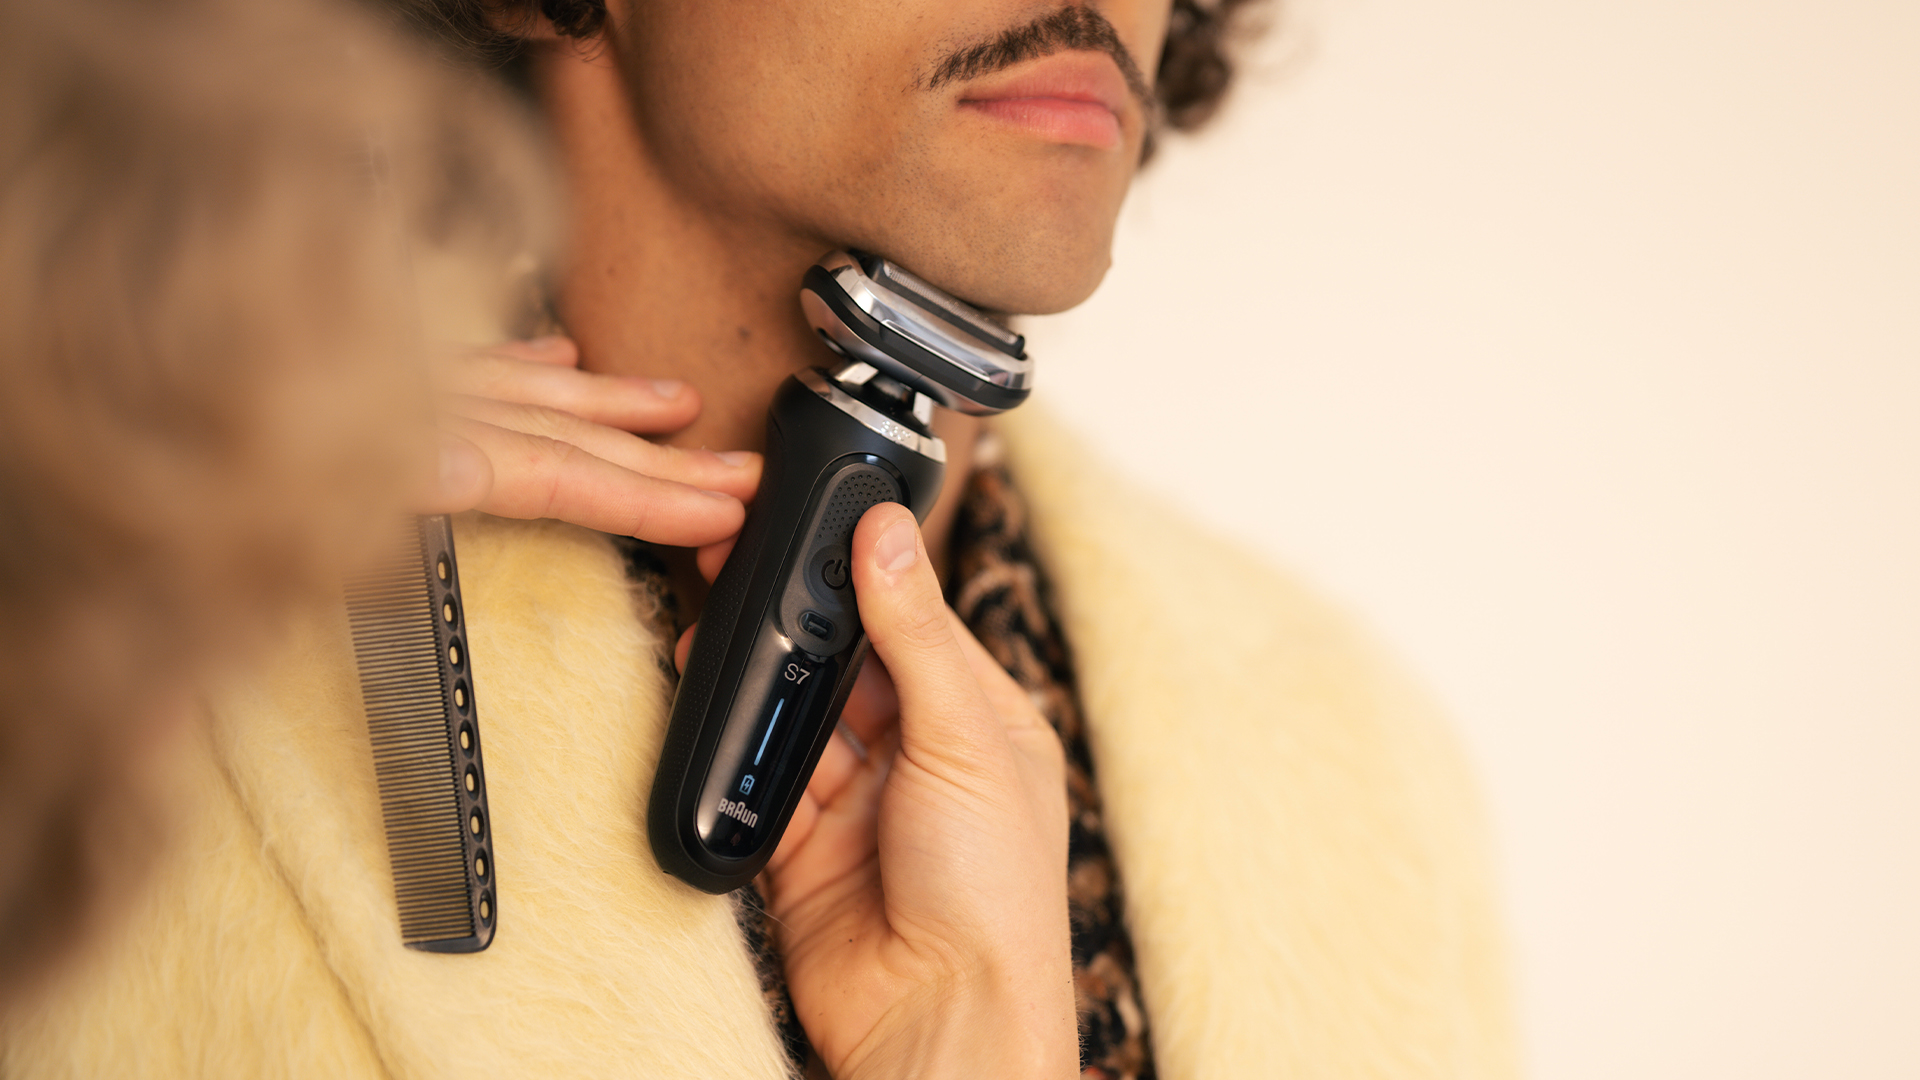 all-about-the-braun-grooming-event-in-madrid